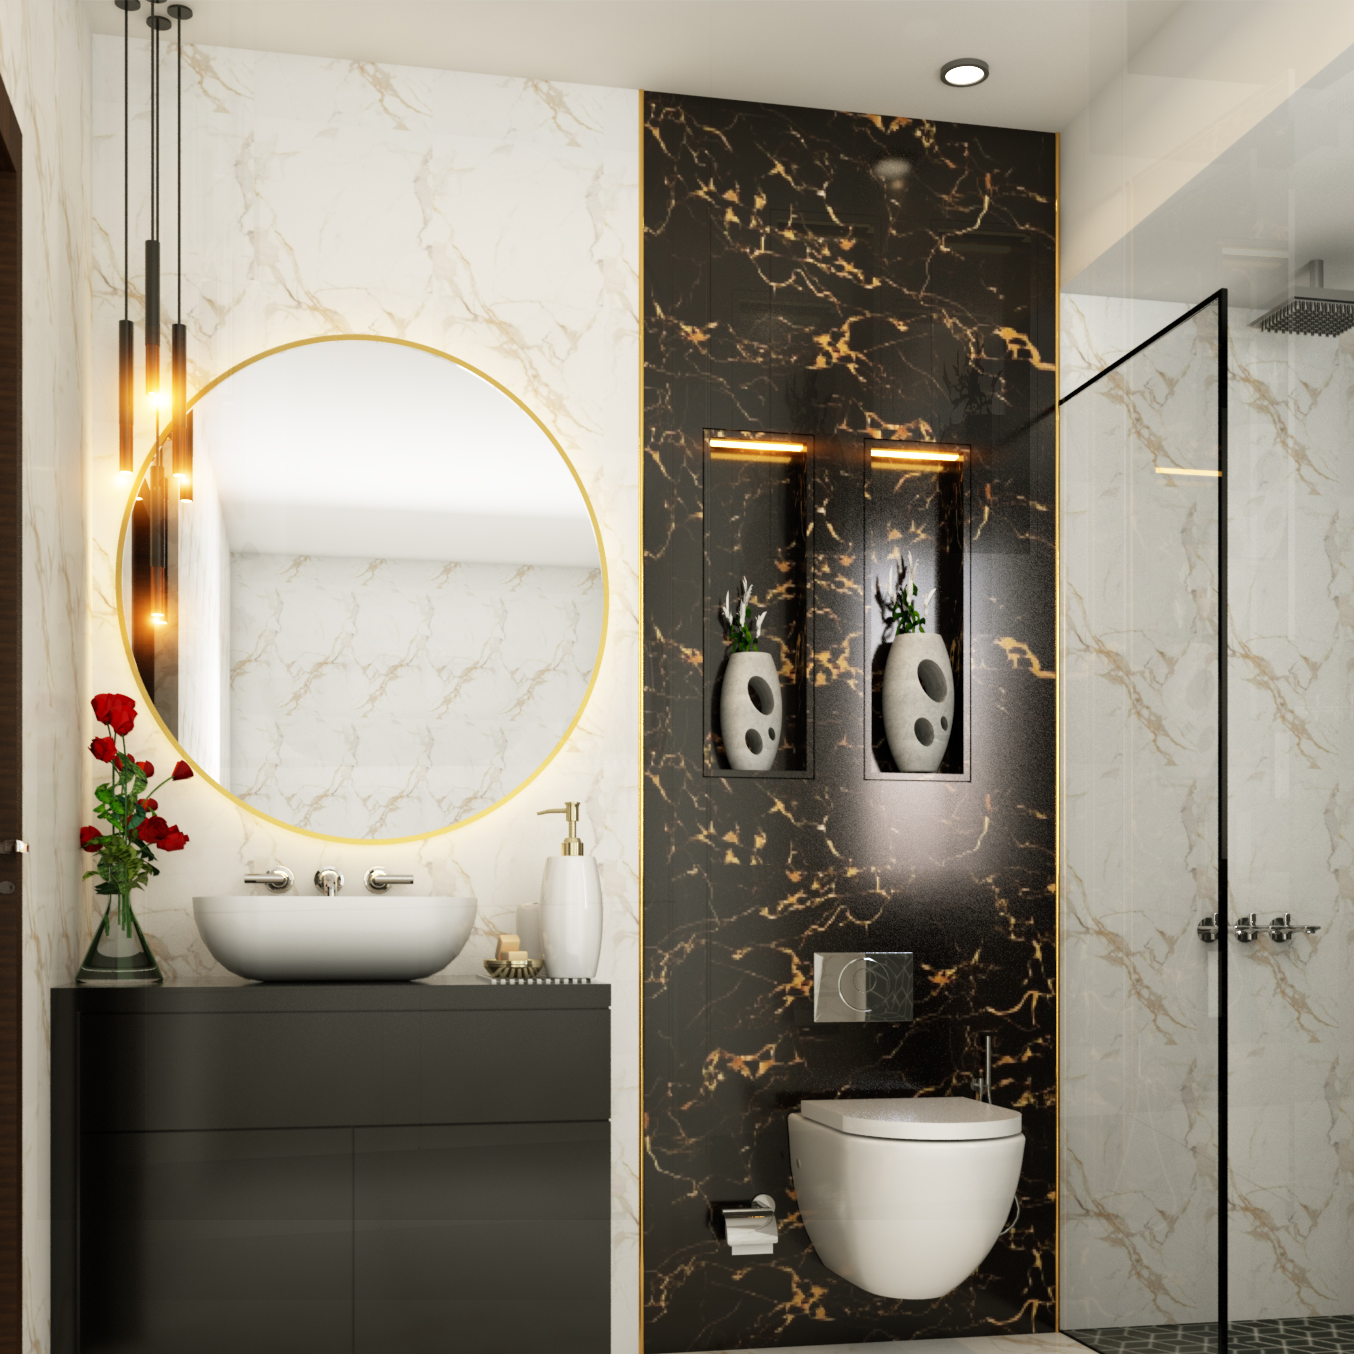 Classic Dual-Toned Bathroom Design With Marble Walls